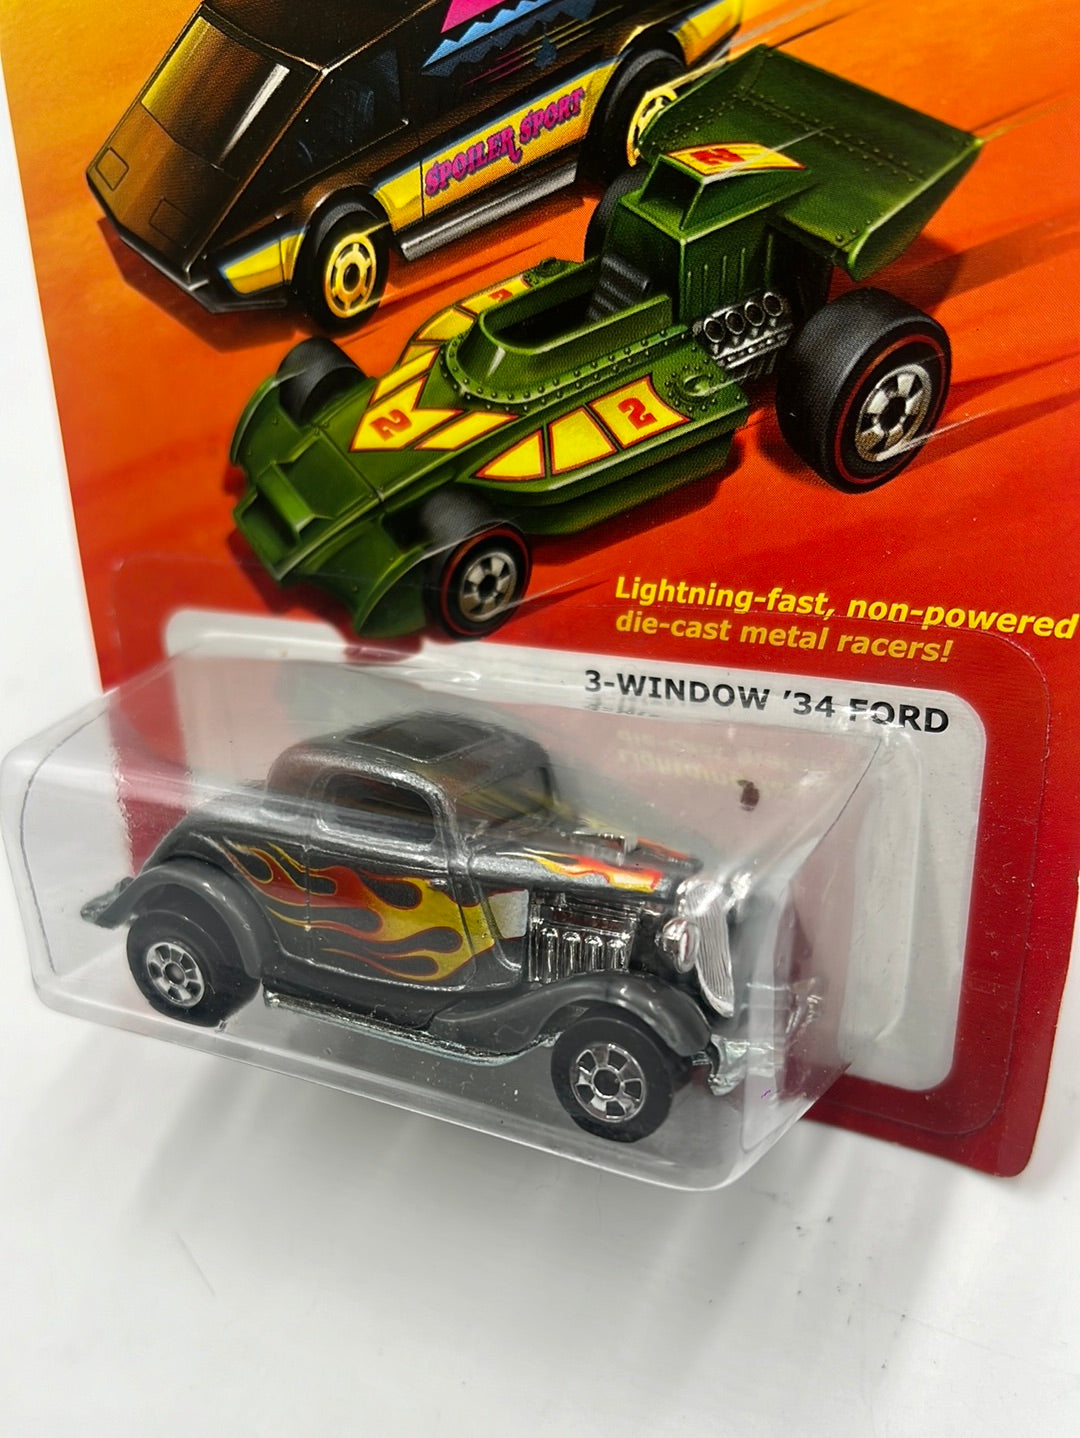 Hot Wheels The Hot Ones 3 Window ‘34 Ford 158A